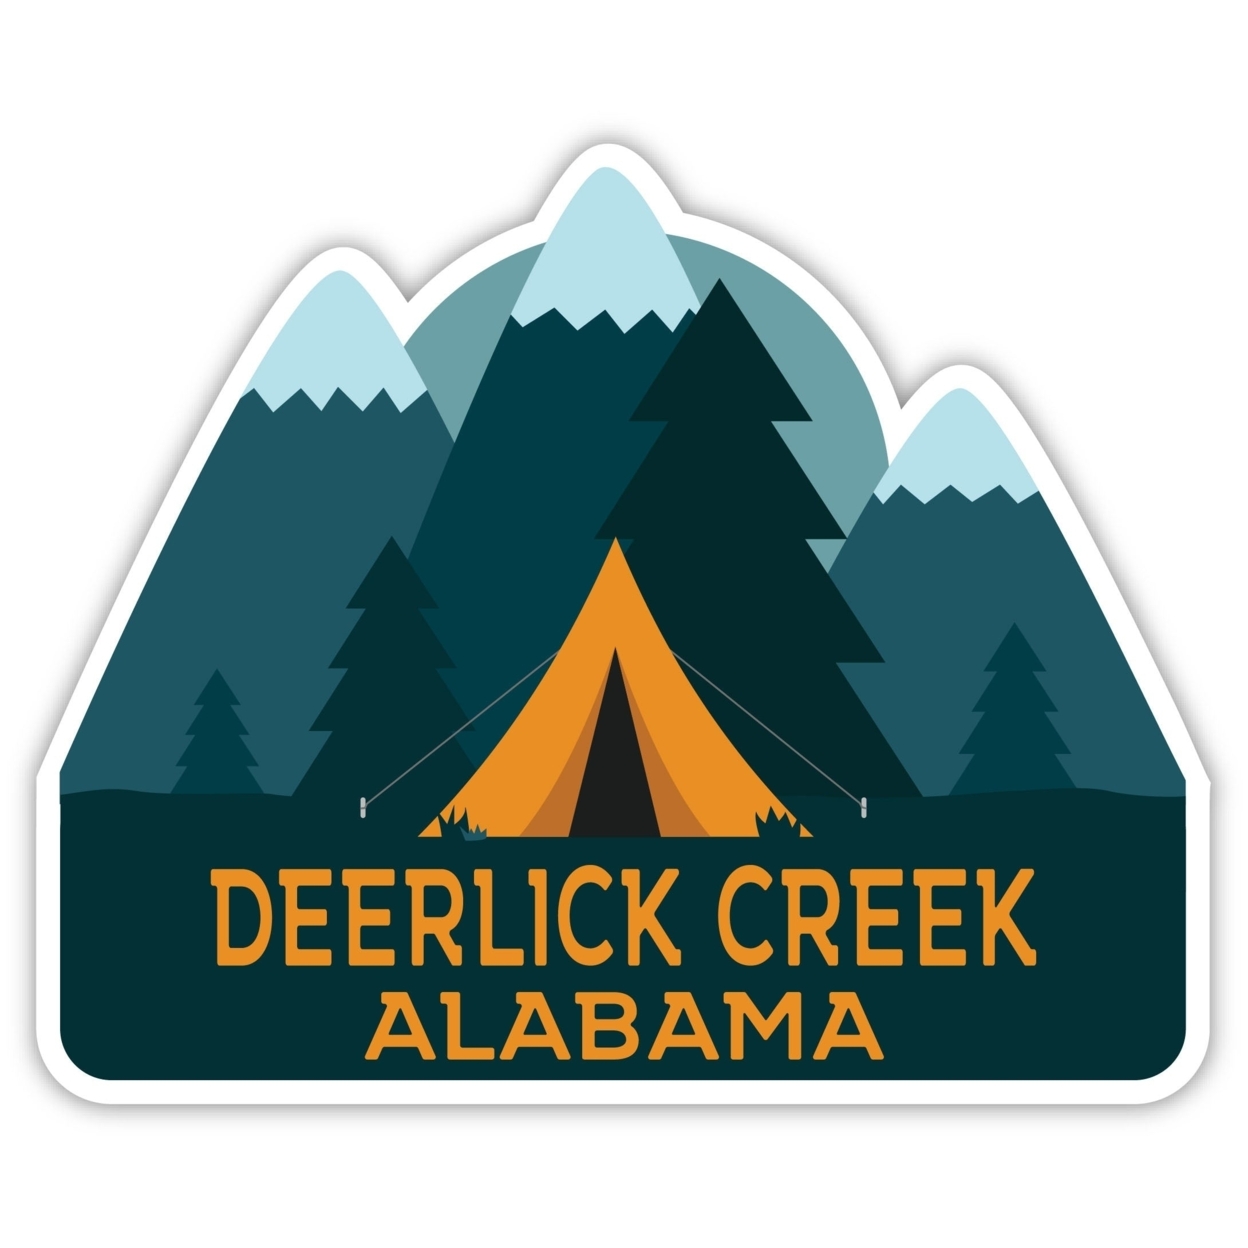 Deerlick Creek Alabama Souvenir Decorative Stickers (Choose Theme And Size) - 4-Pack, 2-Inch, Great Outdoors